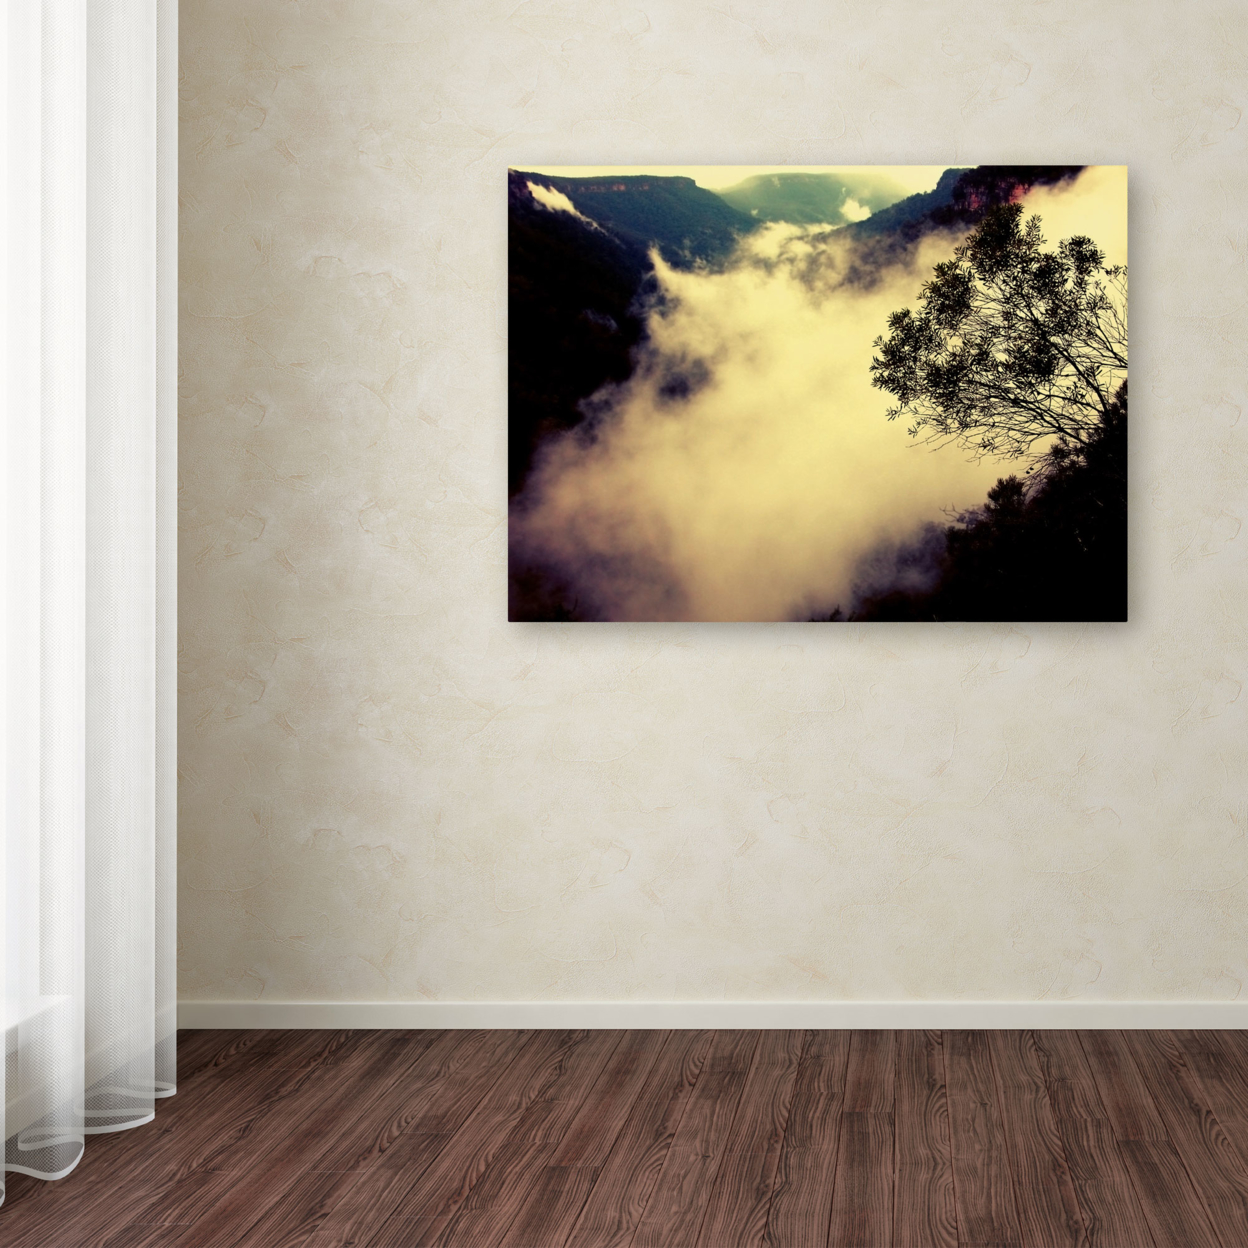 Beata Czyzowska Young 'Valley Of Light' Canvas Wall Art 35 X 47 Inches